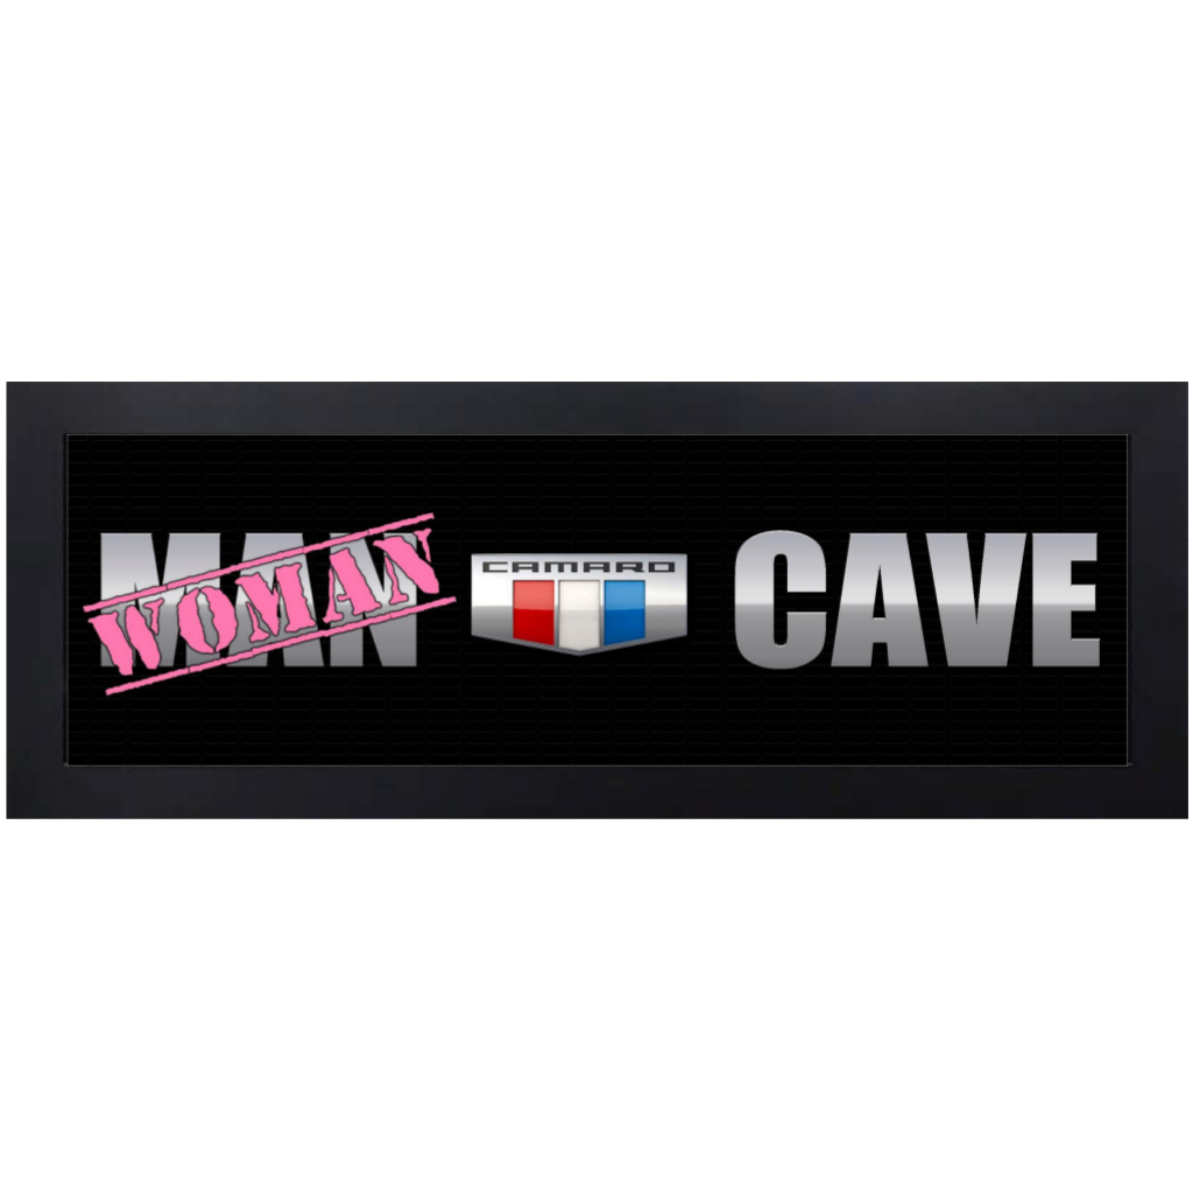 Camaro Woman Cave Framed Sign